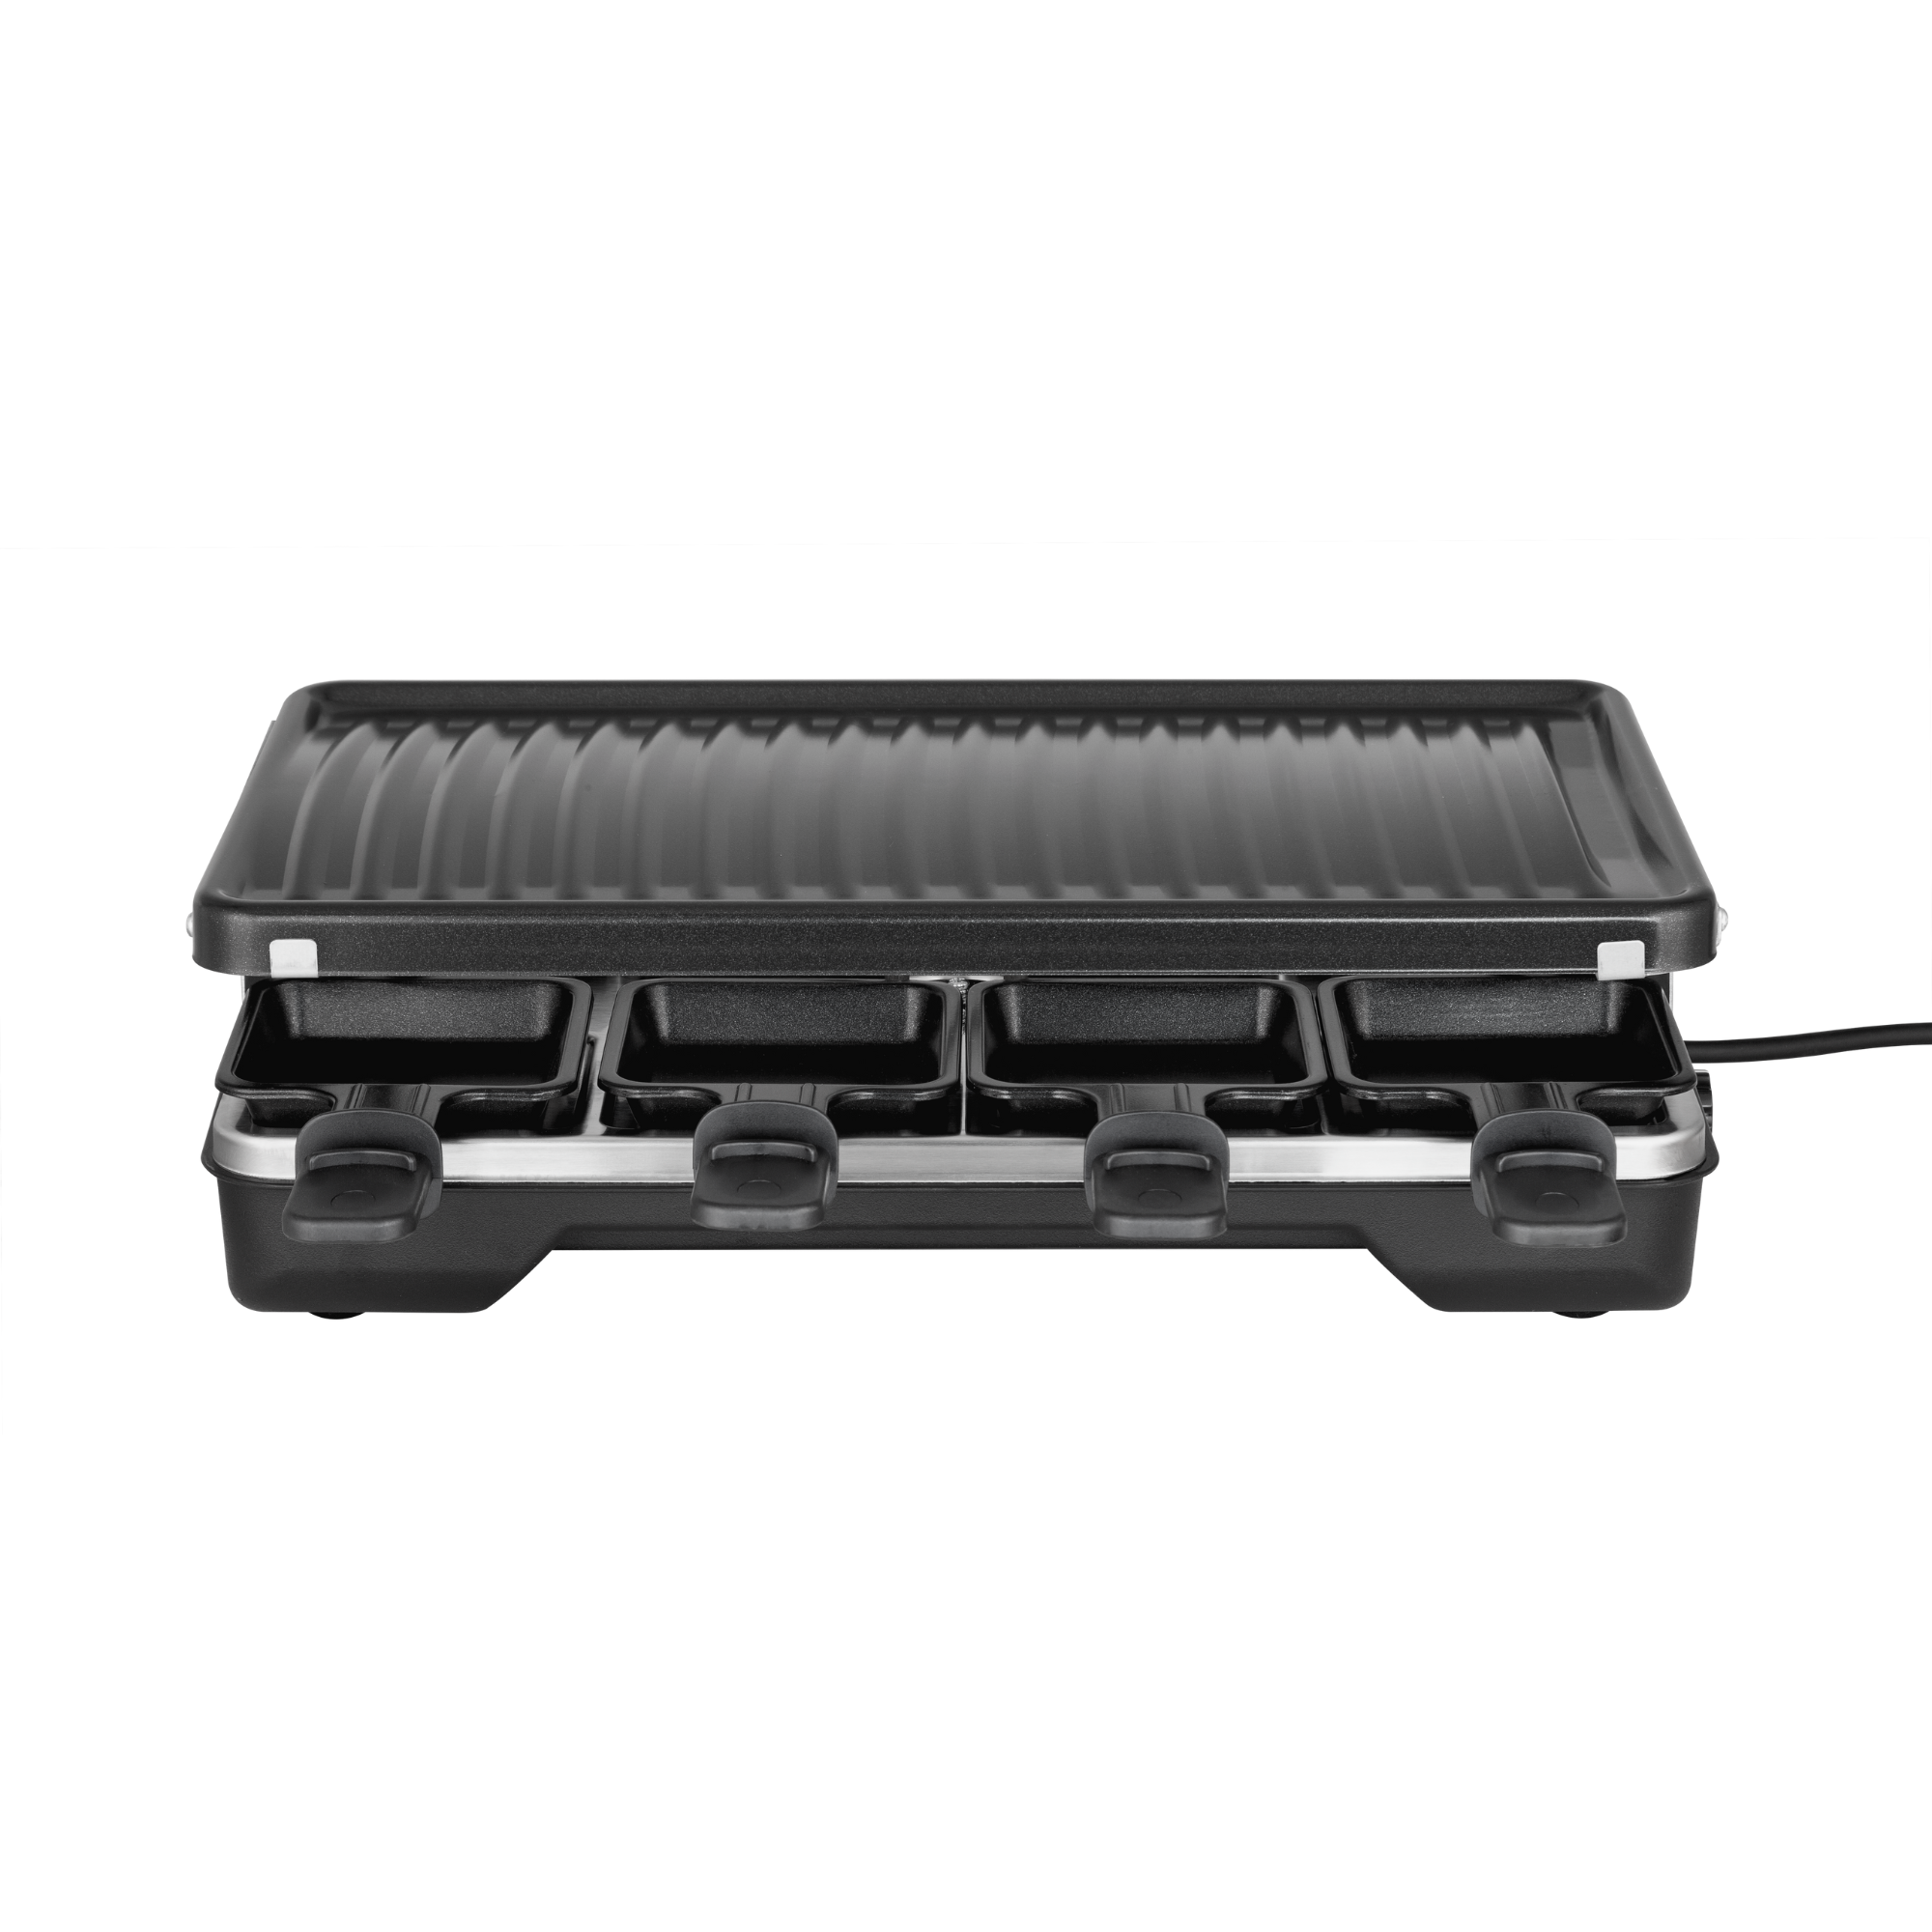 1200W 8 PERSONS RACLETTE GRILL